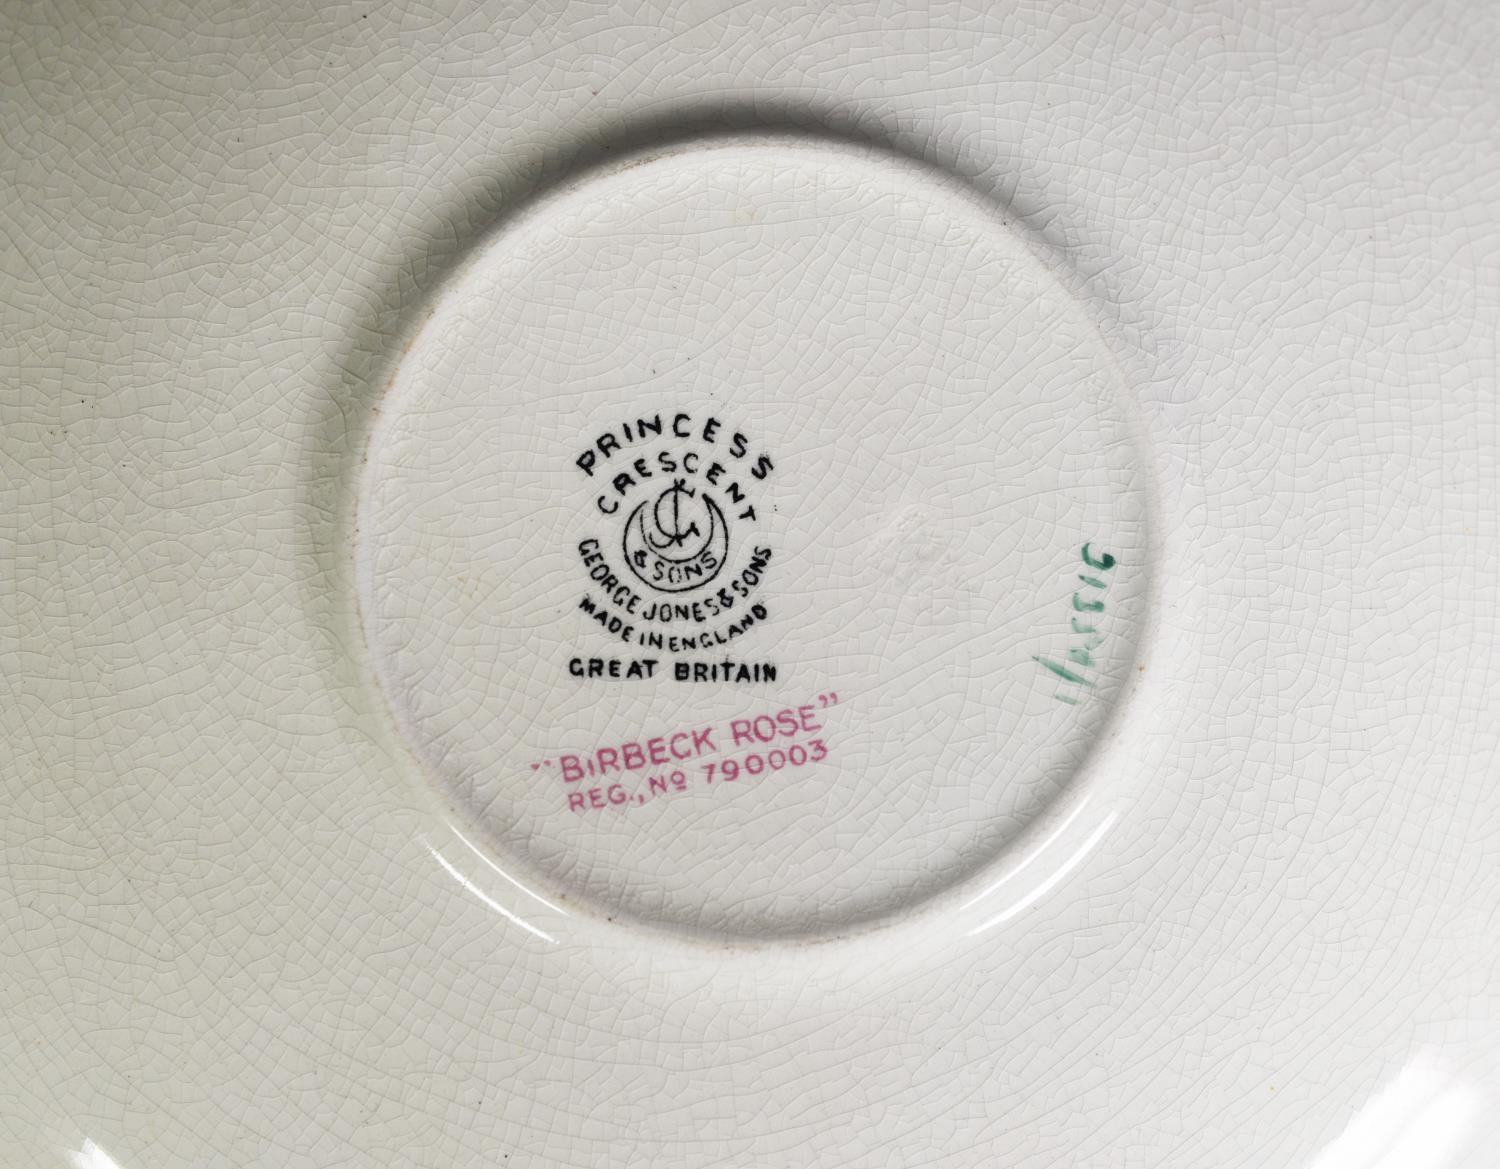 EARLY 20th CENTURY GEORGE JONES & SONS, PRINCESS CRESCENT POTTERY - BIRBECK ROSE PATTERN ROUNDED- - Image 2 of 2